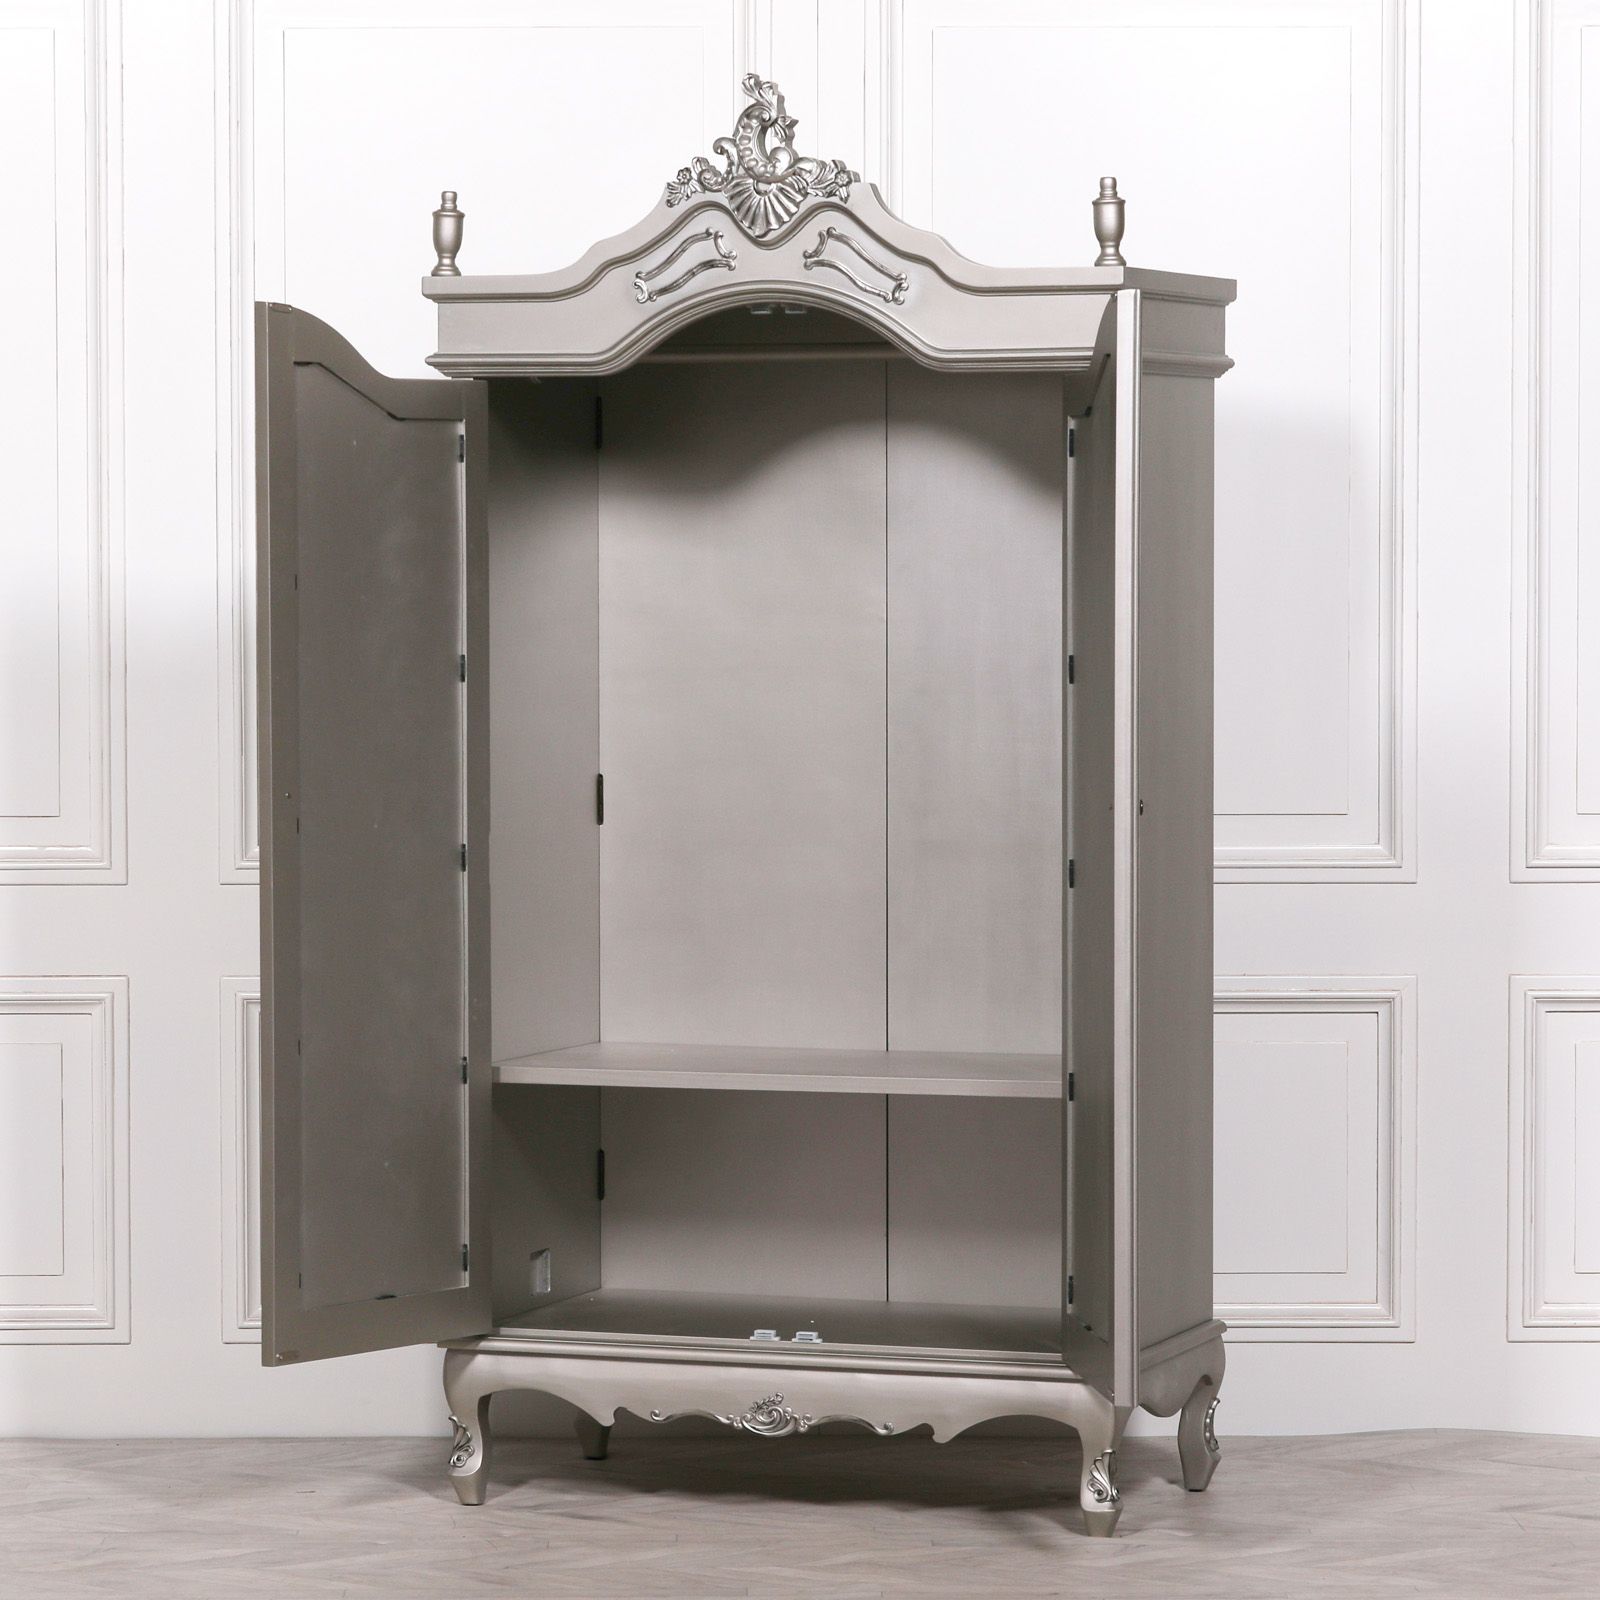 French Style Double Armoire Silver Wardrobe Mirrored Doors With Regard To Silver French Wardrobes (Gallery 6 of 20)